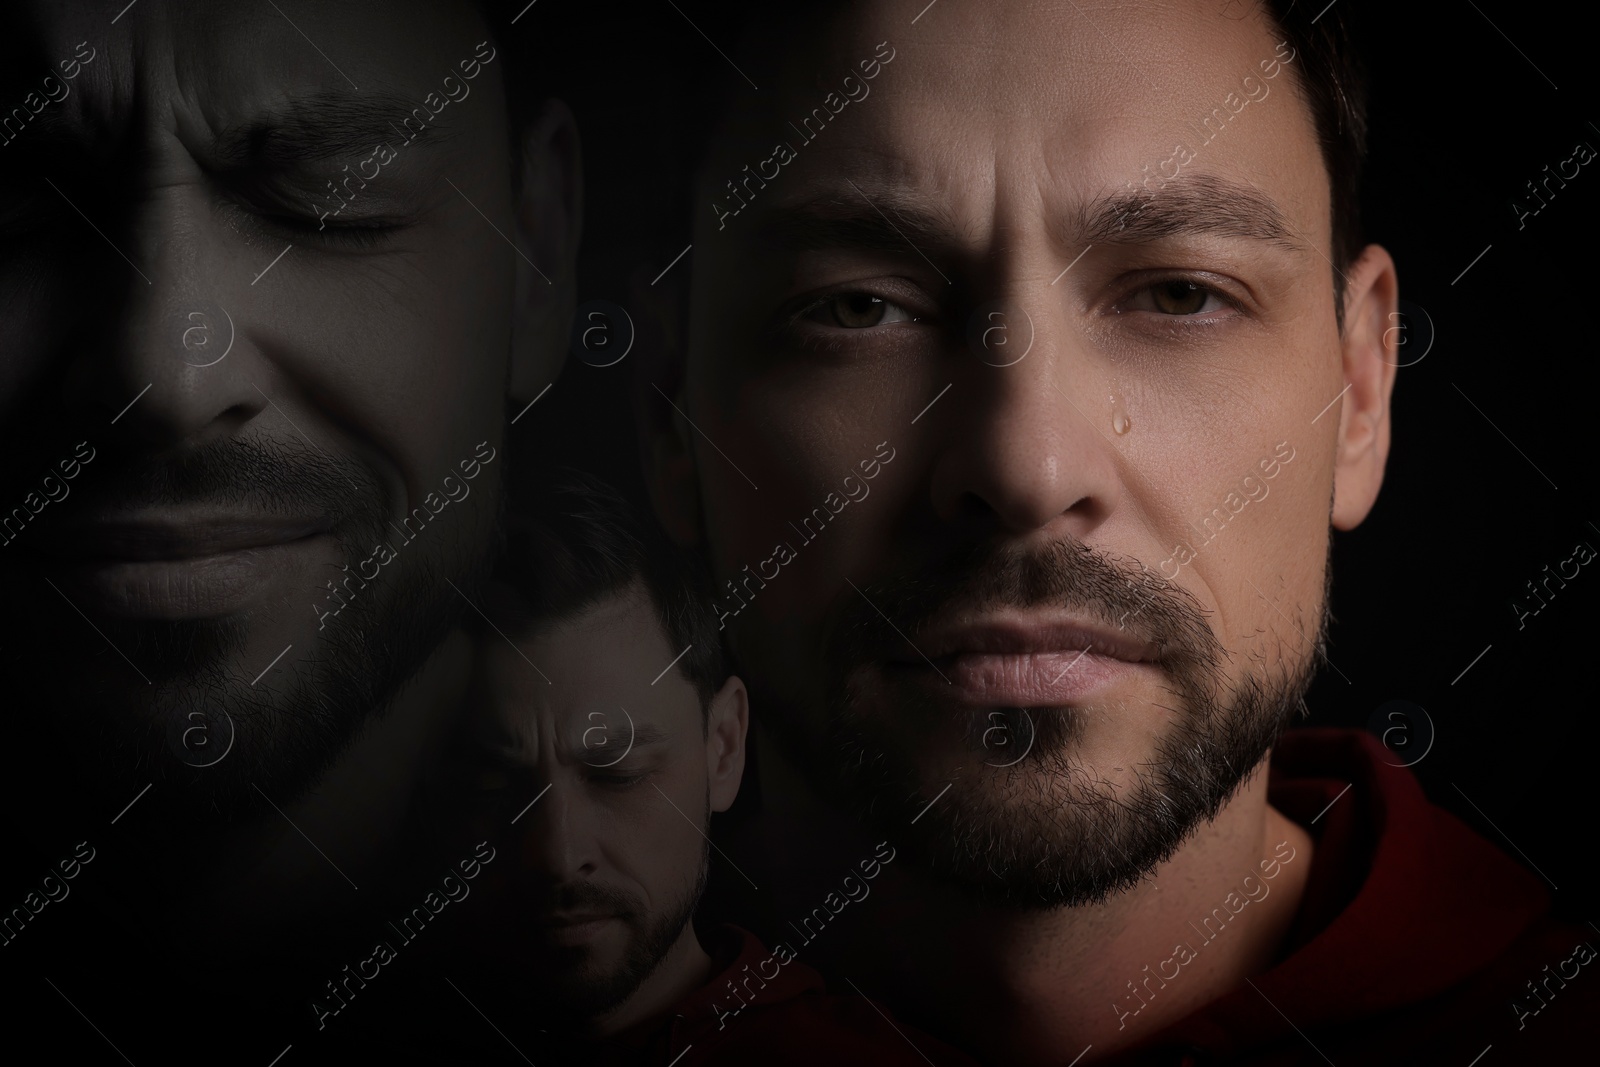 Image of Man suffering from mental illness on black background. Dissociative identity disorder